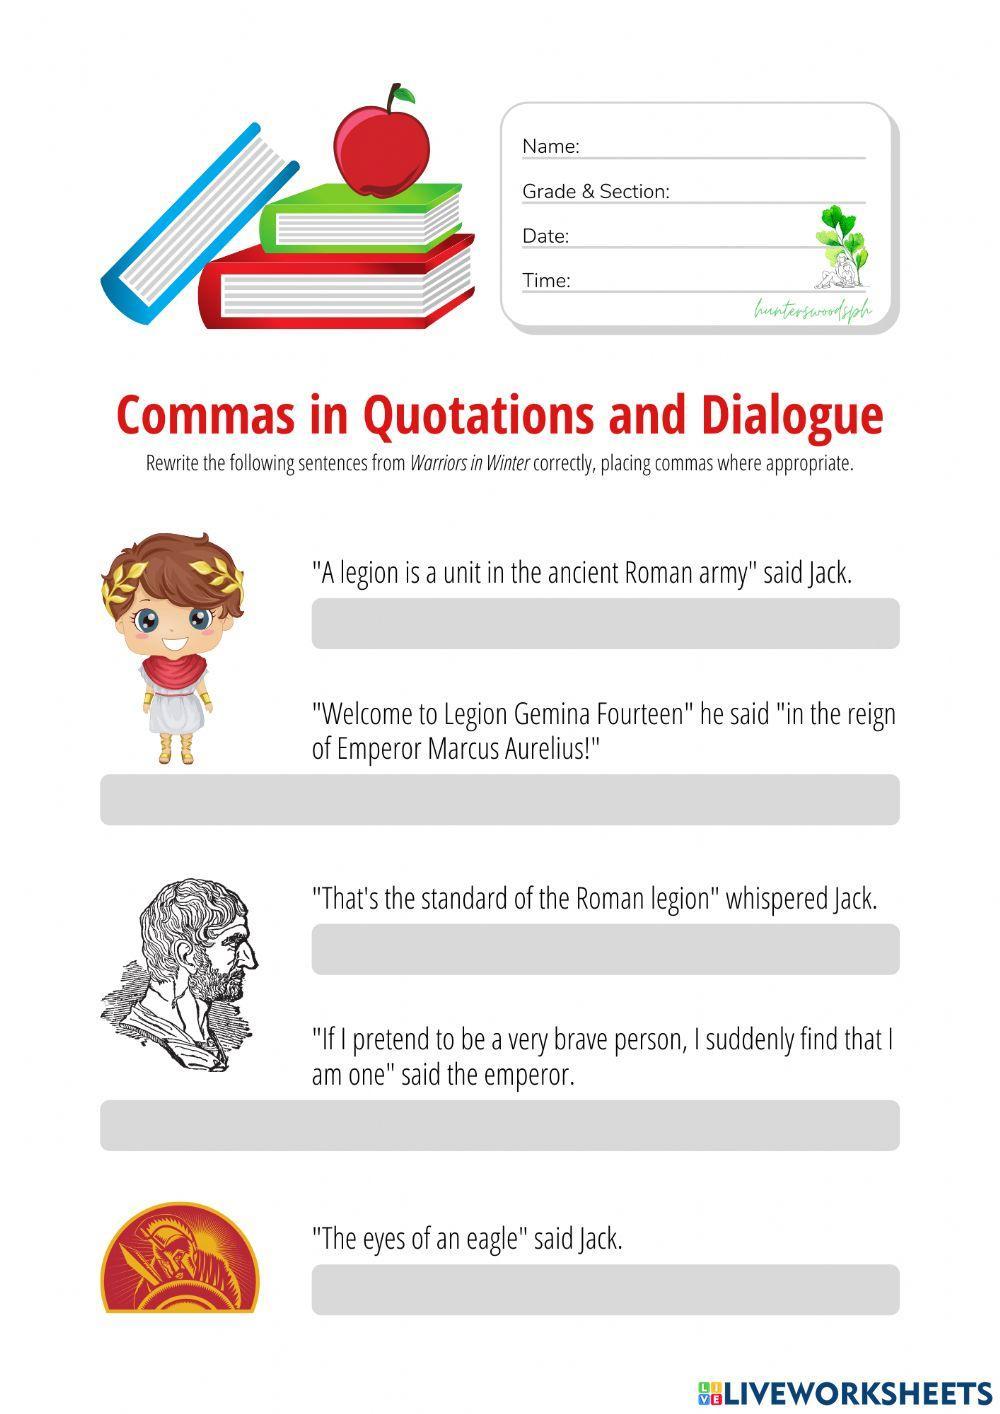 Commas in Quotations and Dialogue